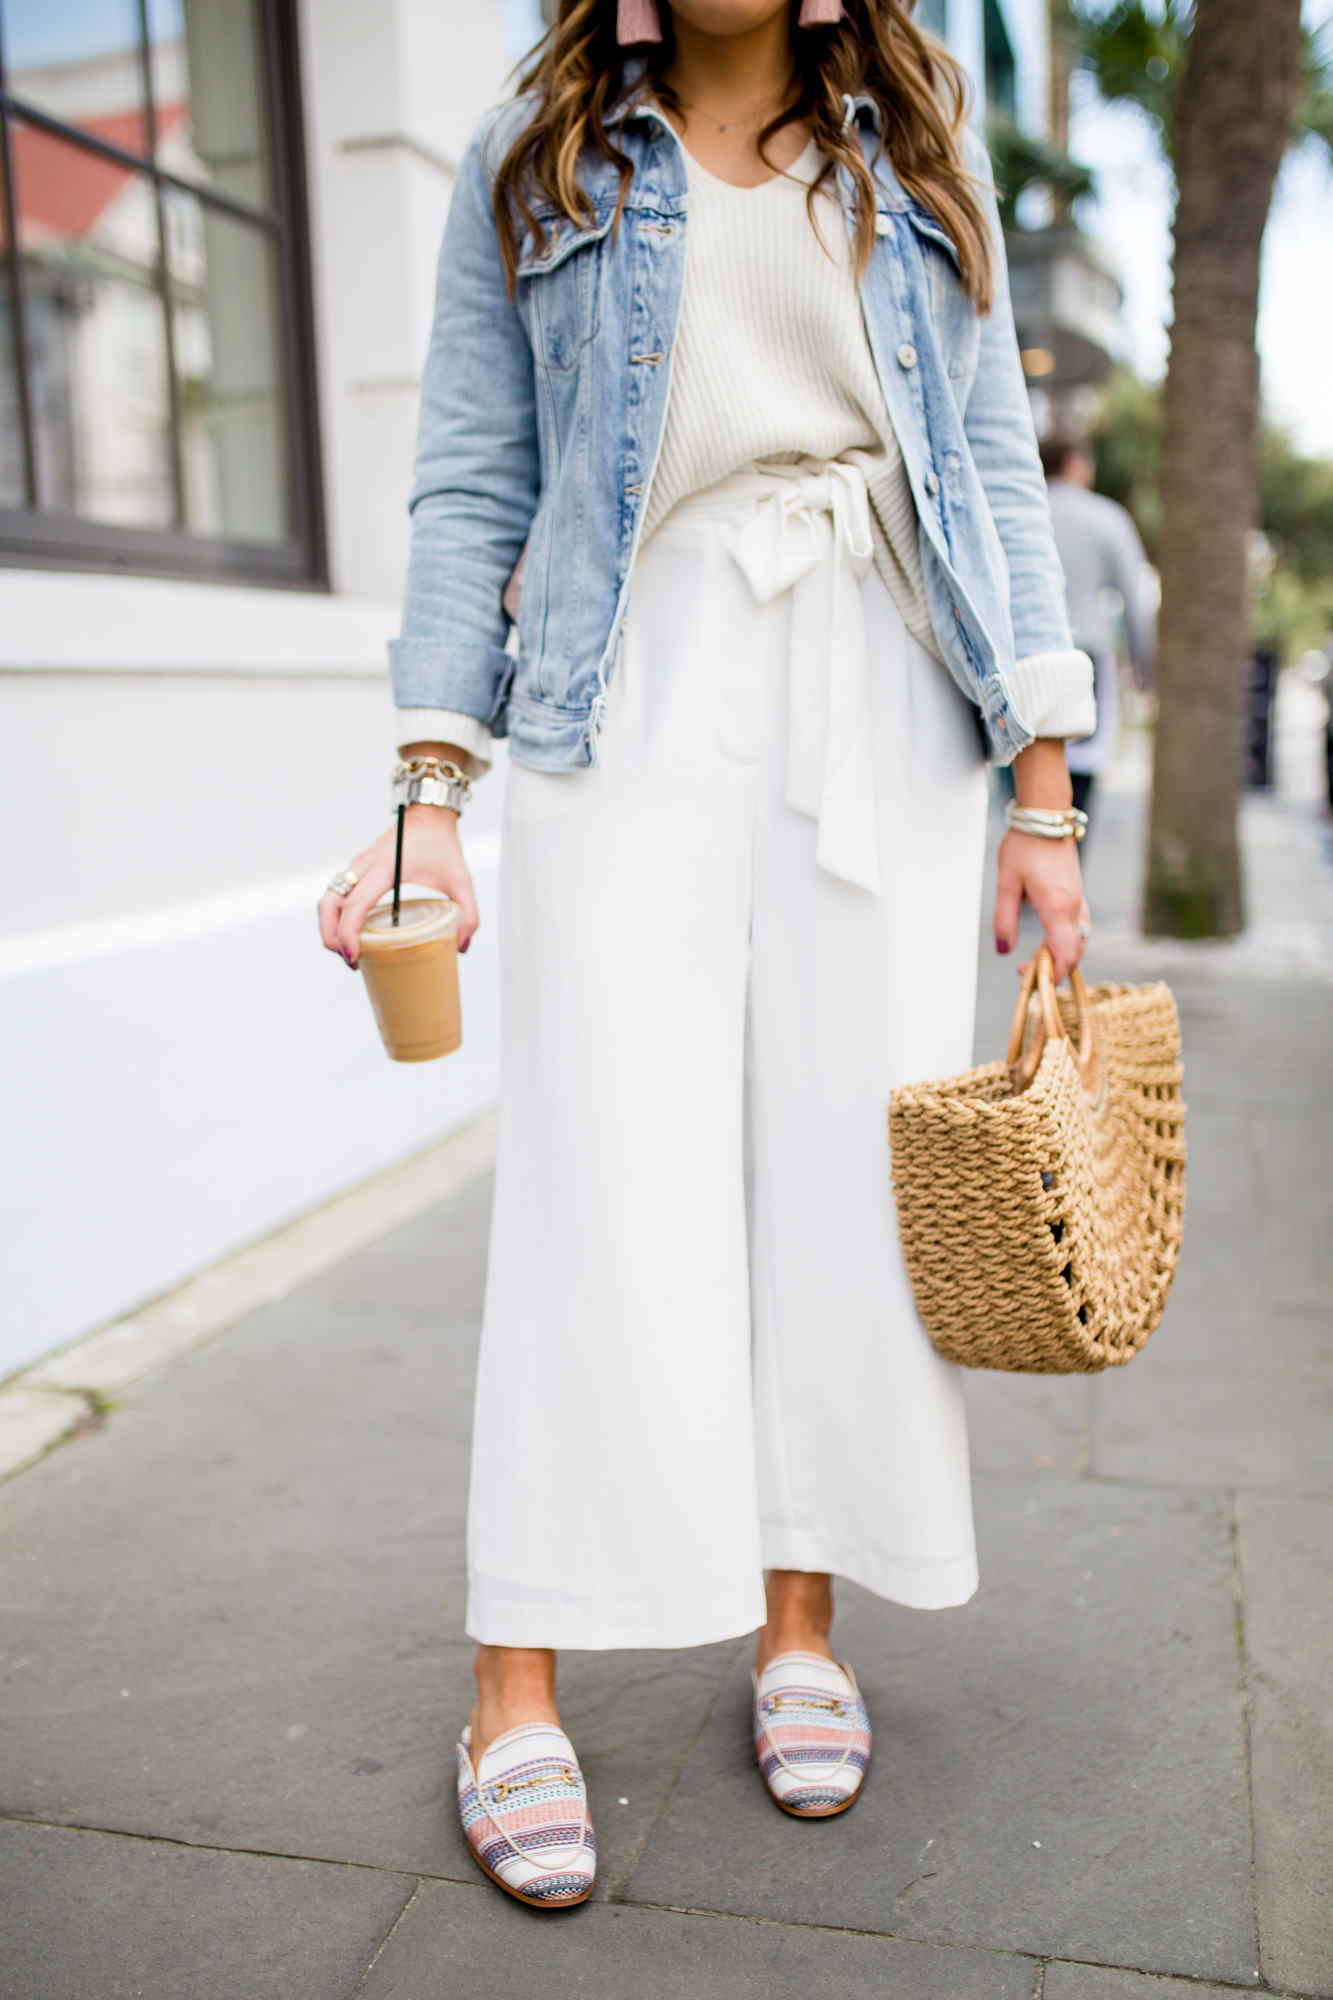 All white spring outfit / Statement pants